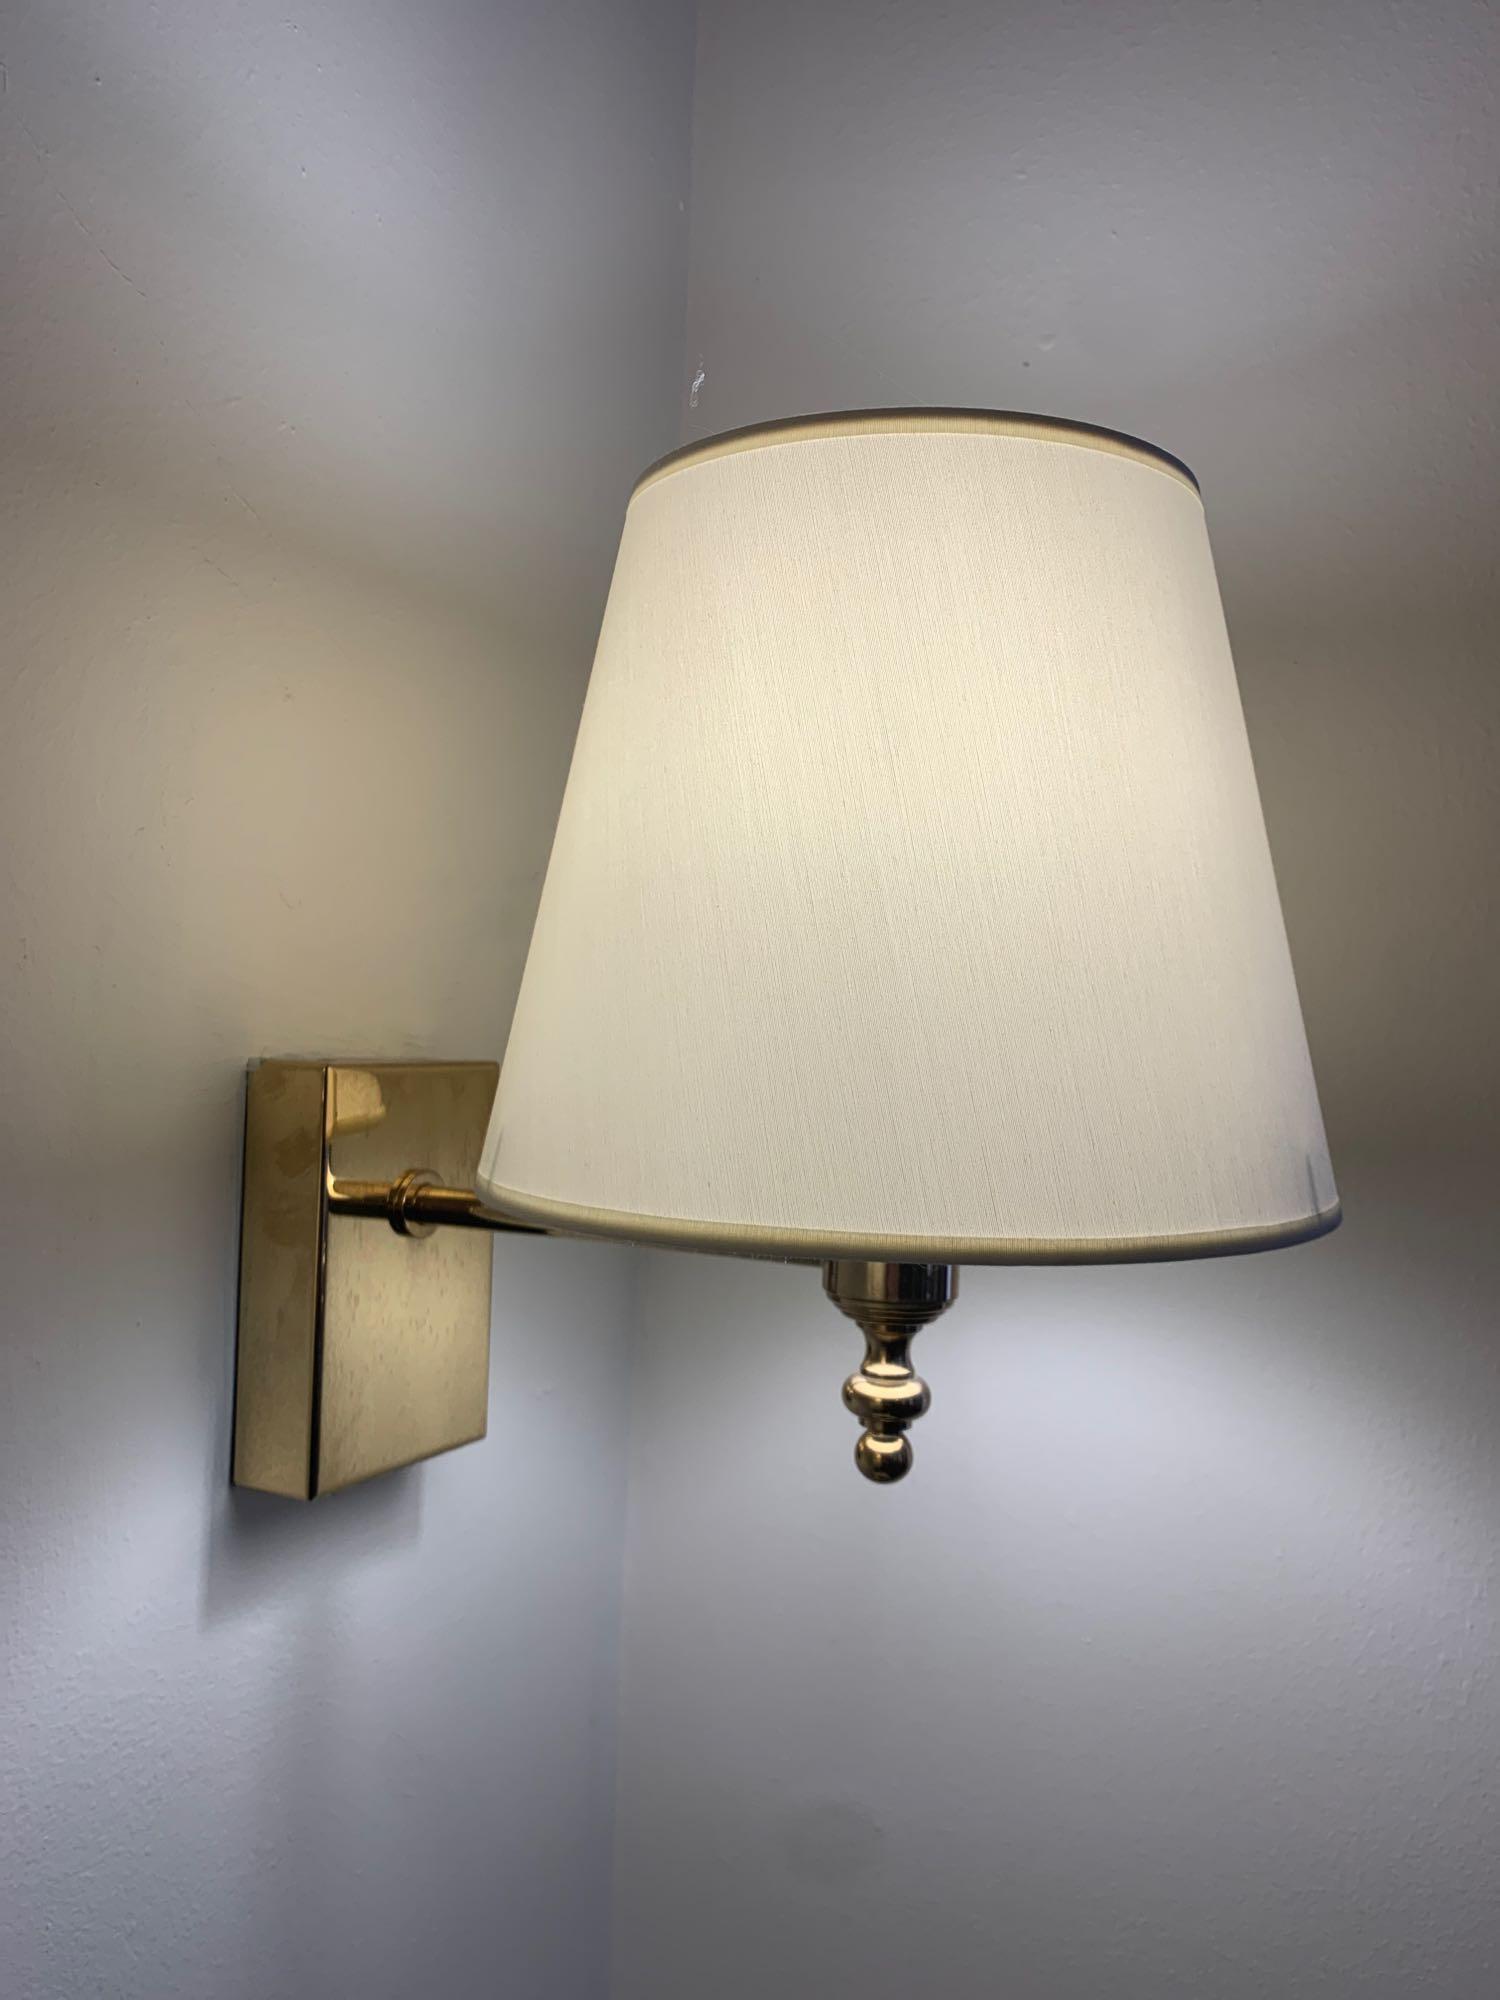 A pair of Chelsom brass polished wall sconces LG20 ( East Wing ) - Image 3 of 4